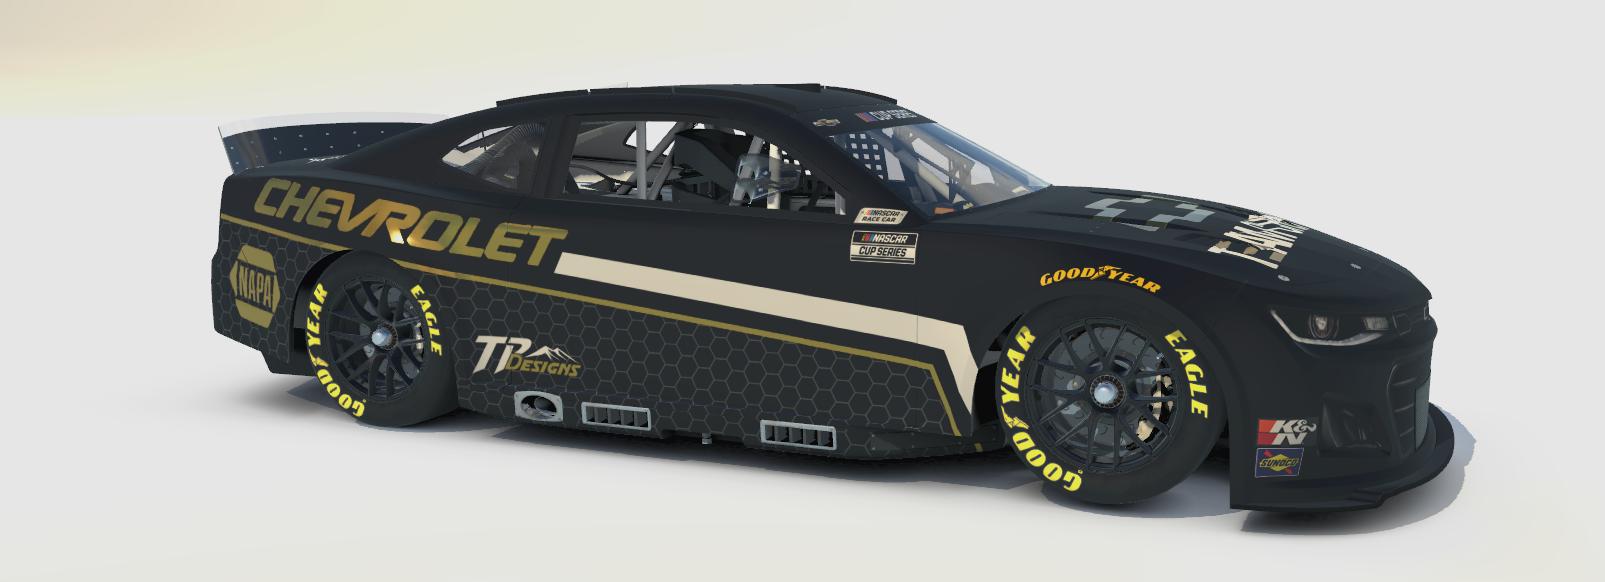 Preview of Team Chevy Next Gen by Trent P.